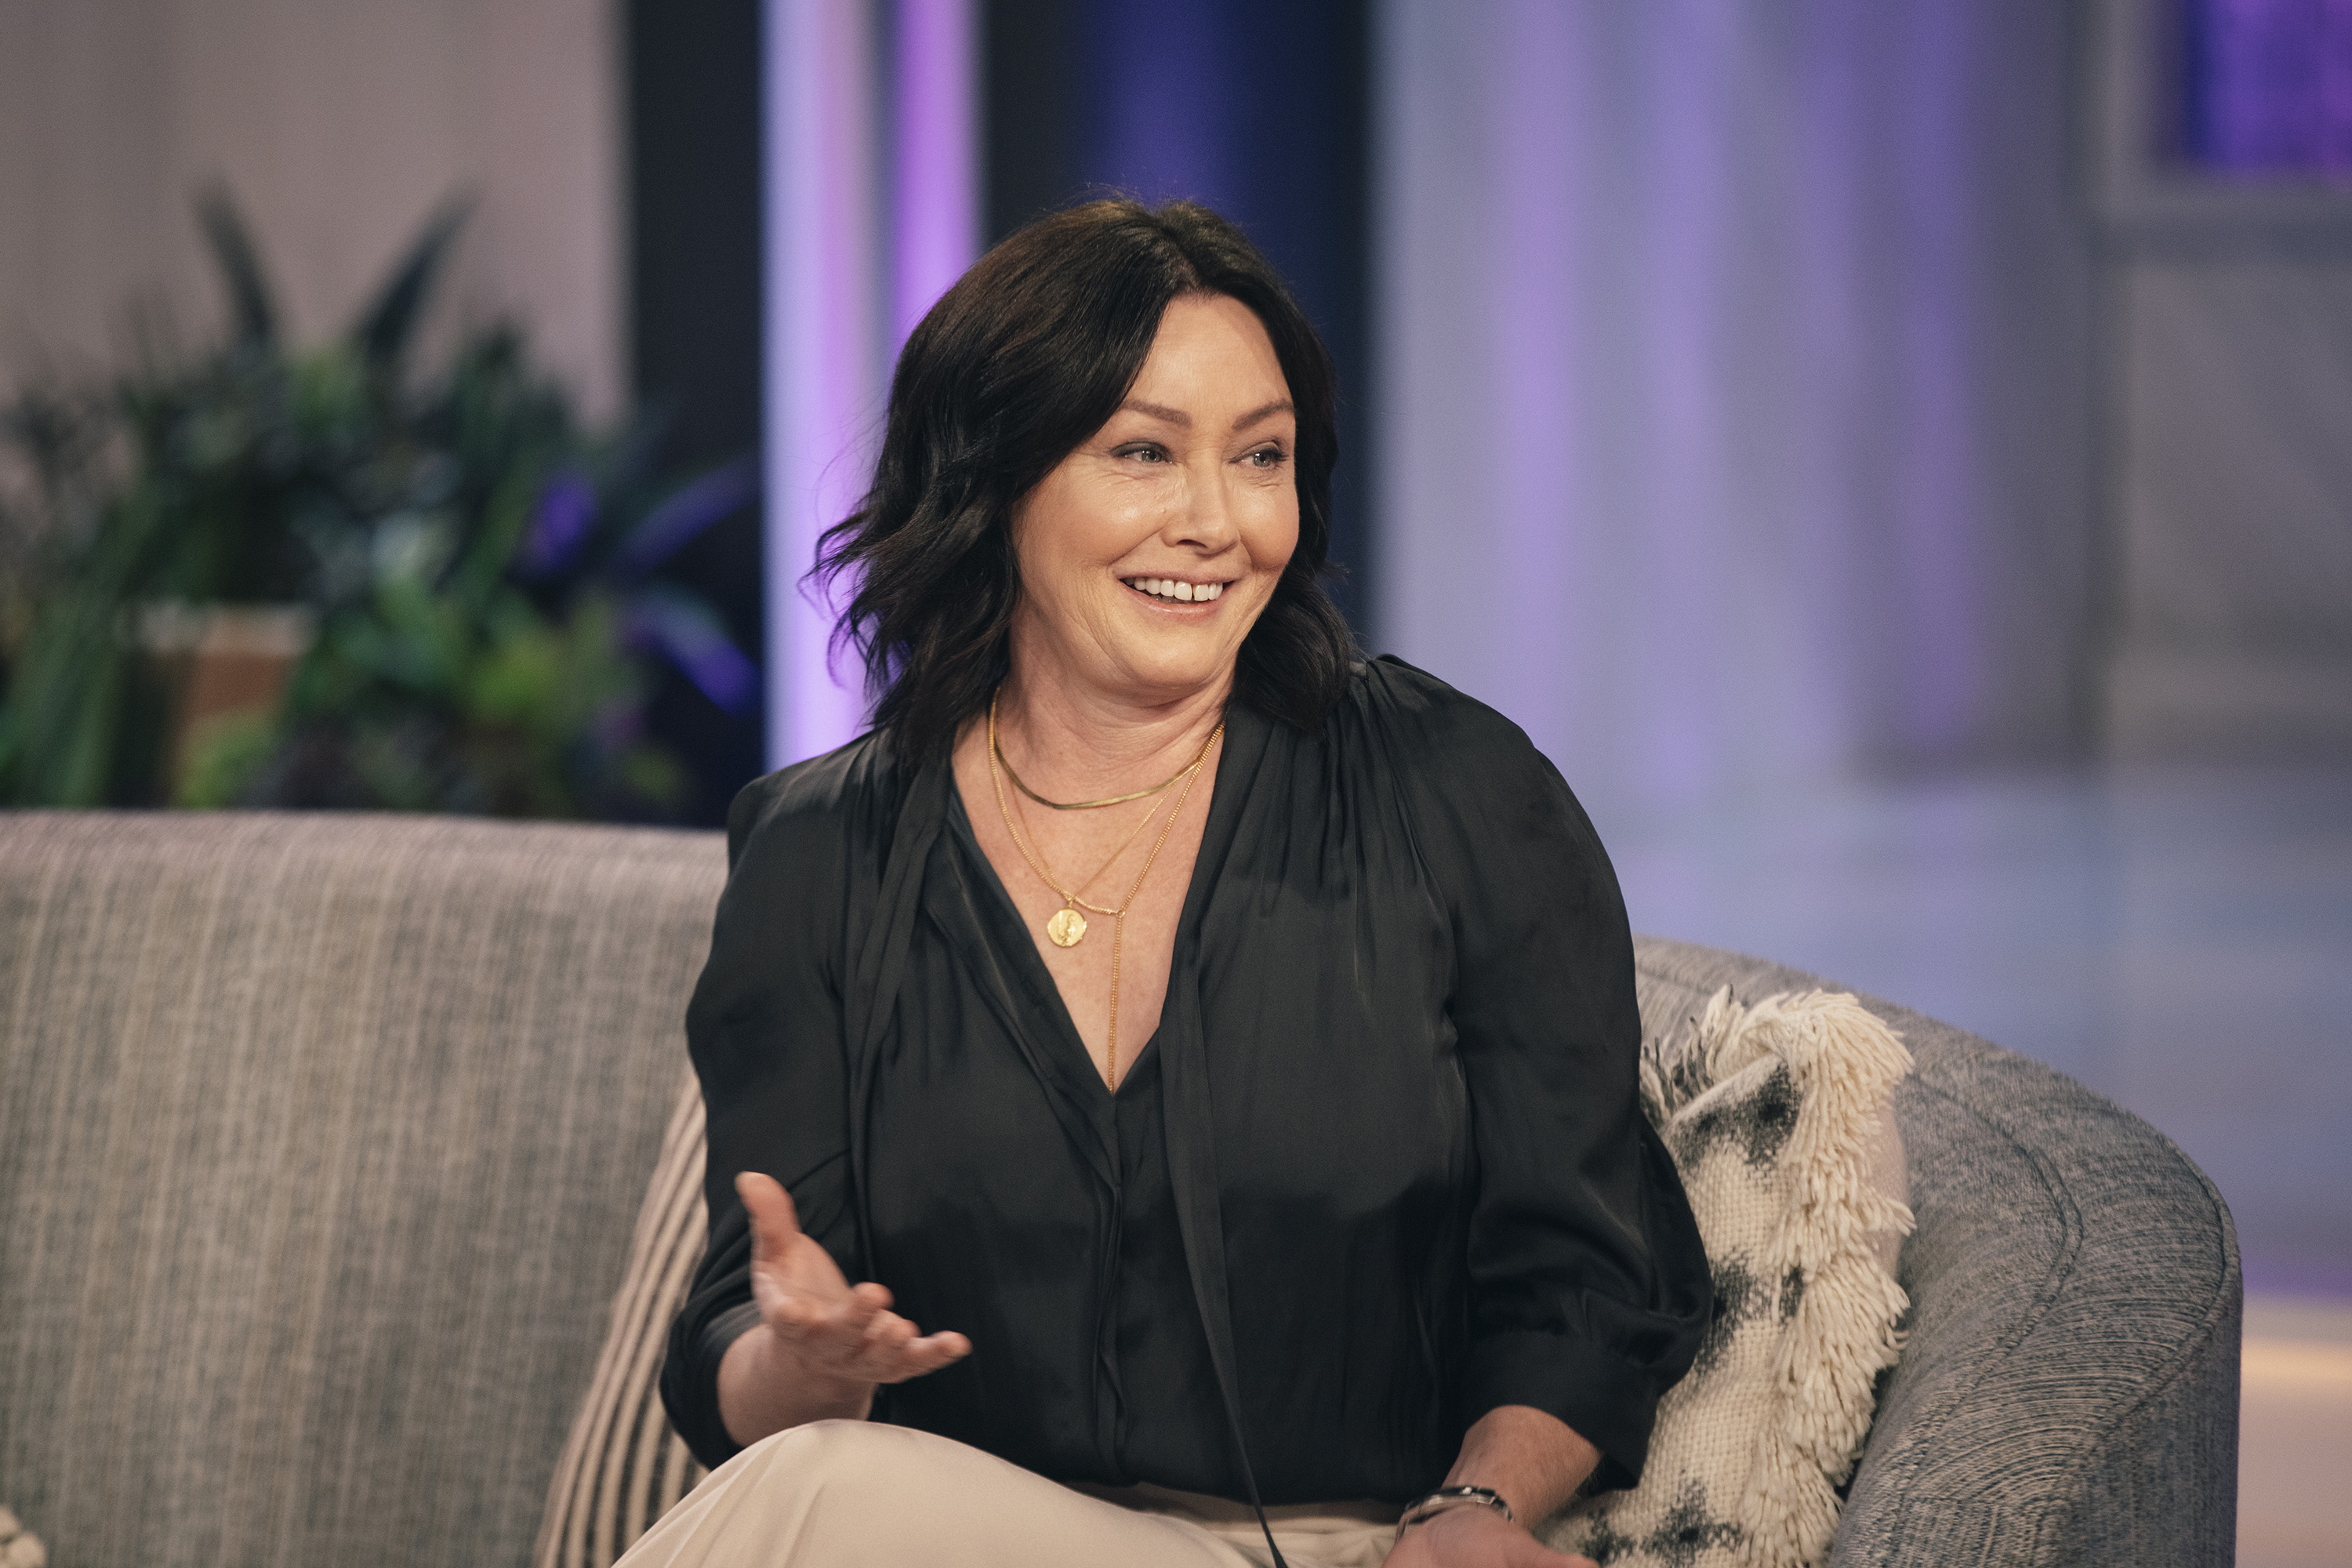 Shannen Doherty on "The Kelly Clarkson Show" on September 8, 2021 | Source: Getty Images